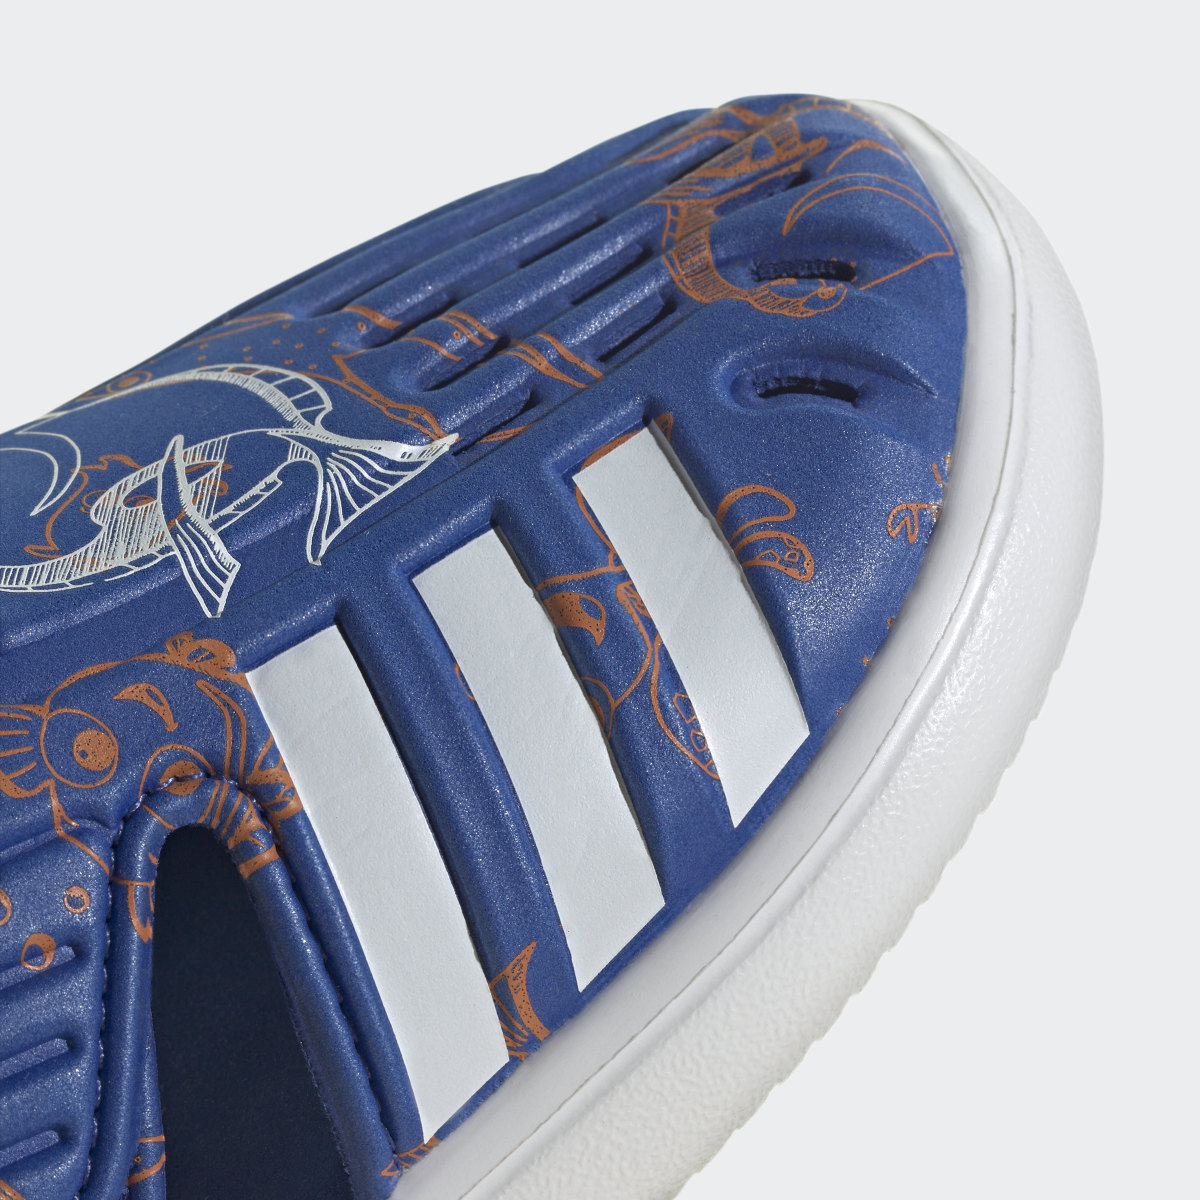 Adidas x Disney Finding Nemo and Dory Closed Toe Summer Water Sandals. 9